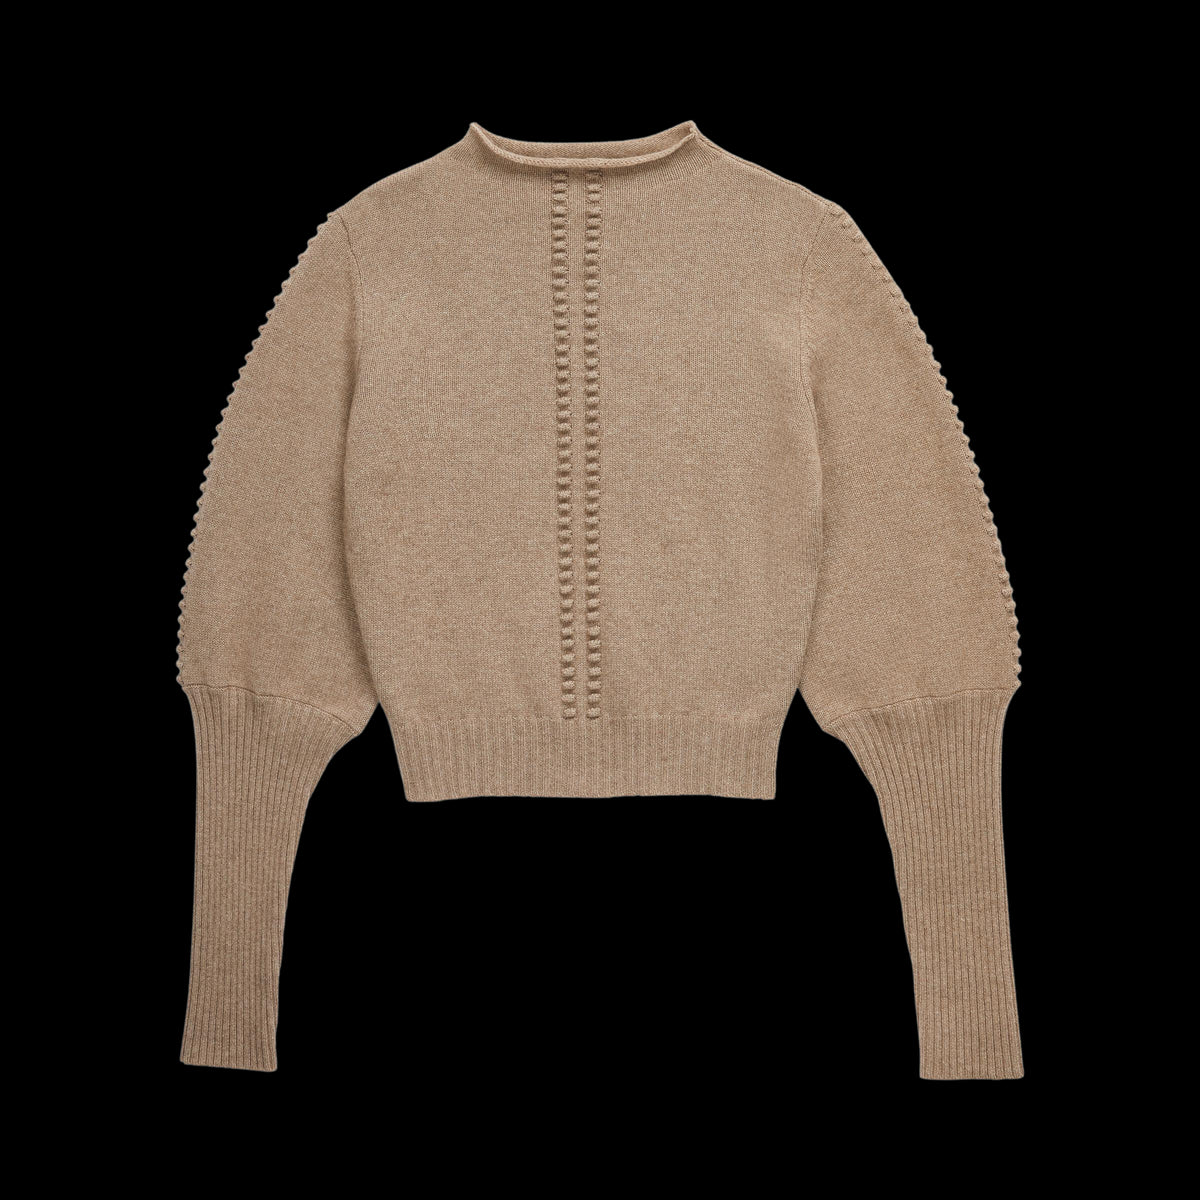 The Chelsea Sweater in Taupe